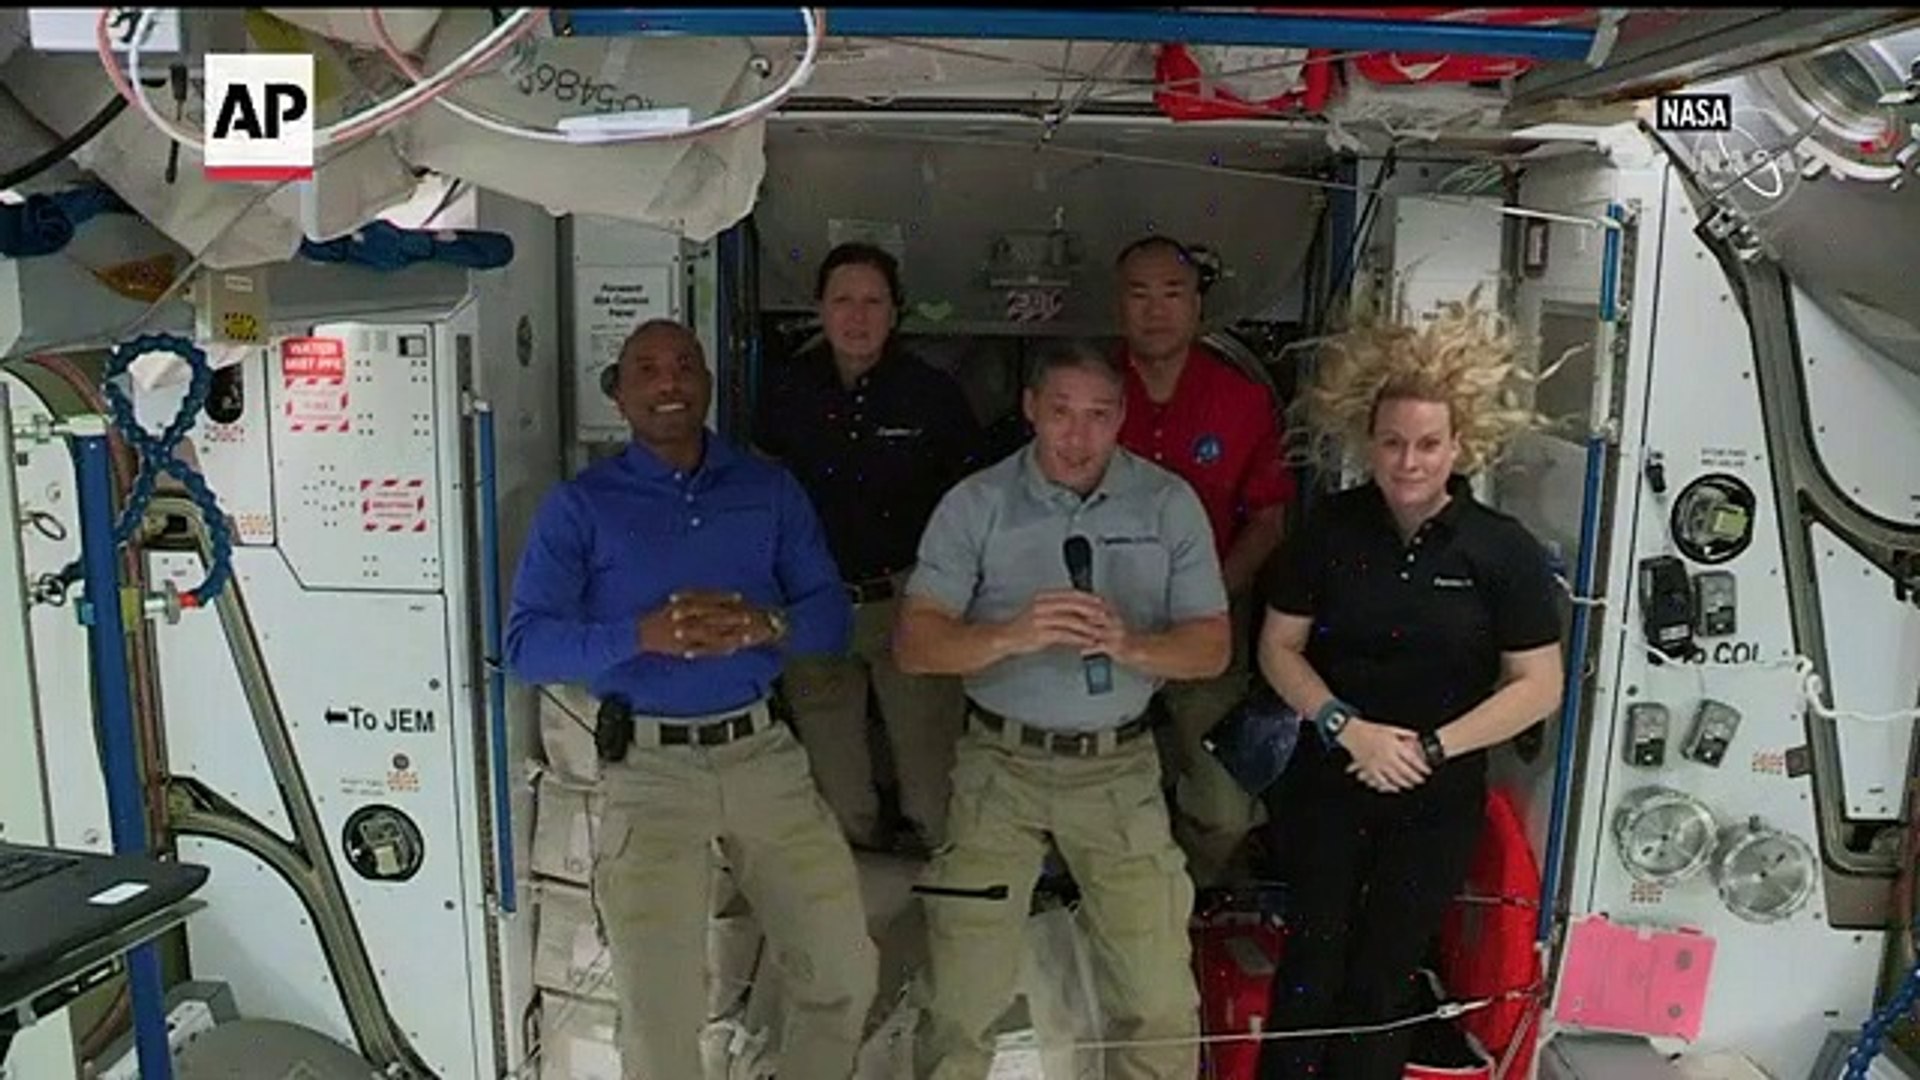 SpaceX crew astronauts discuss journey to ISS